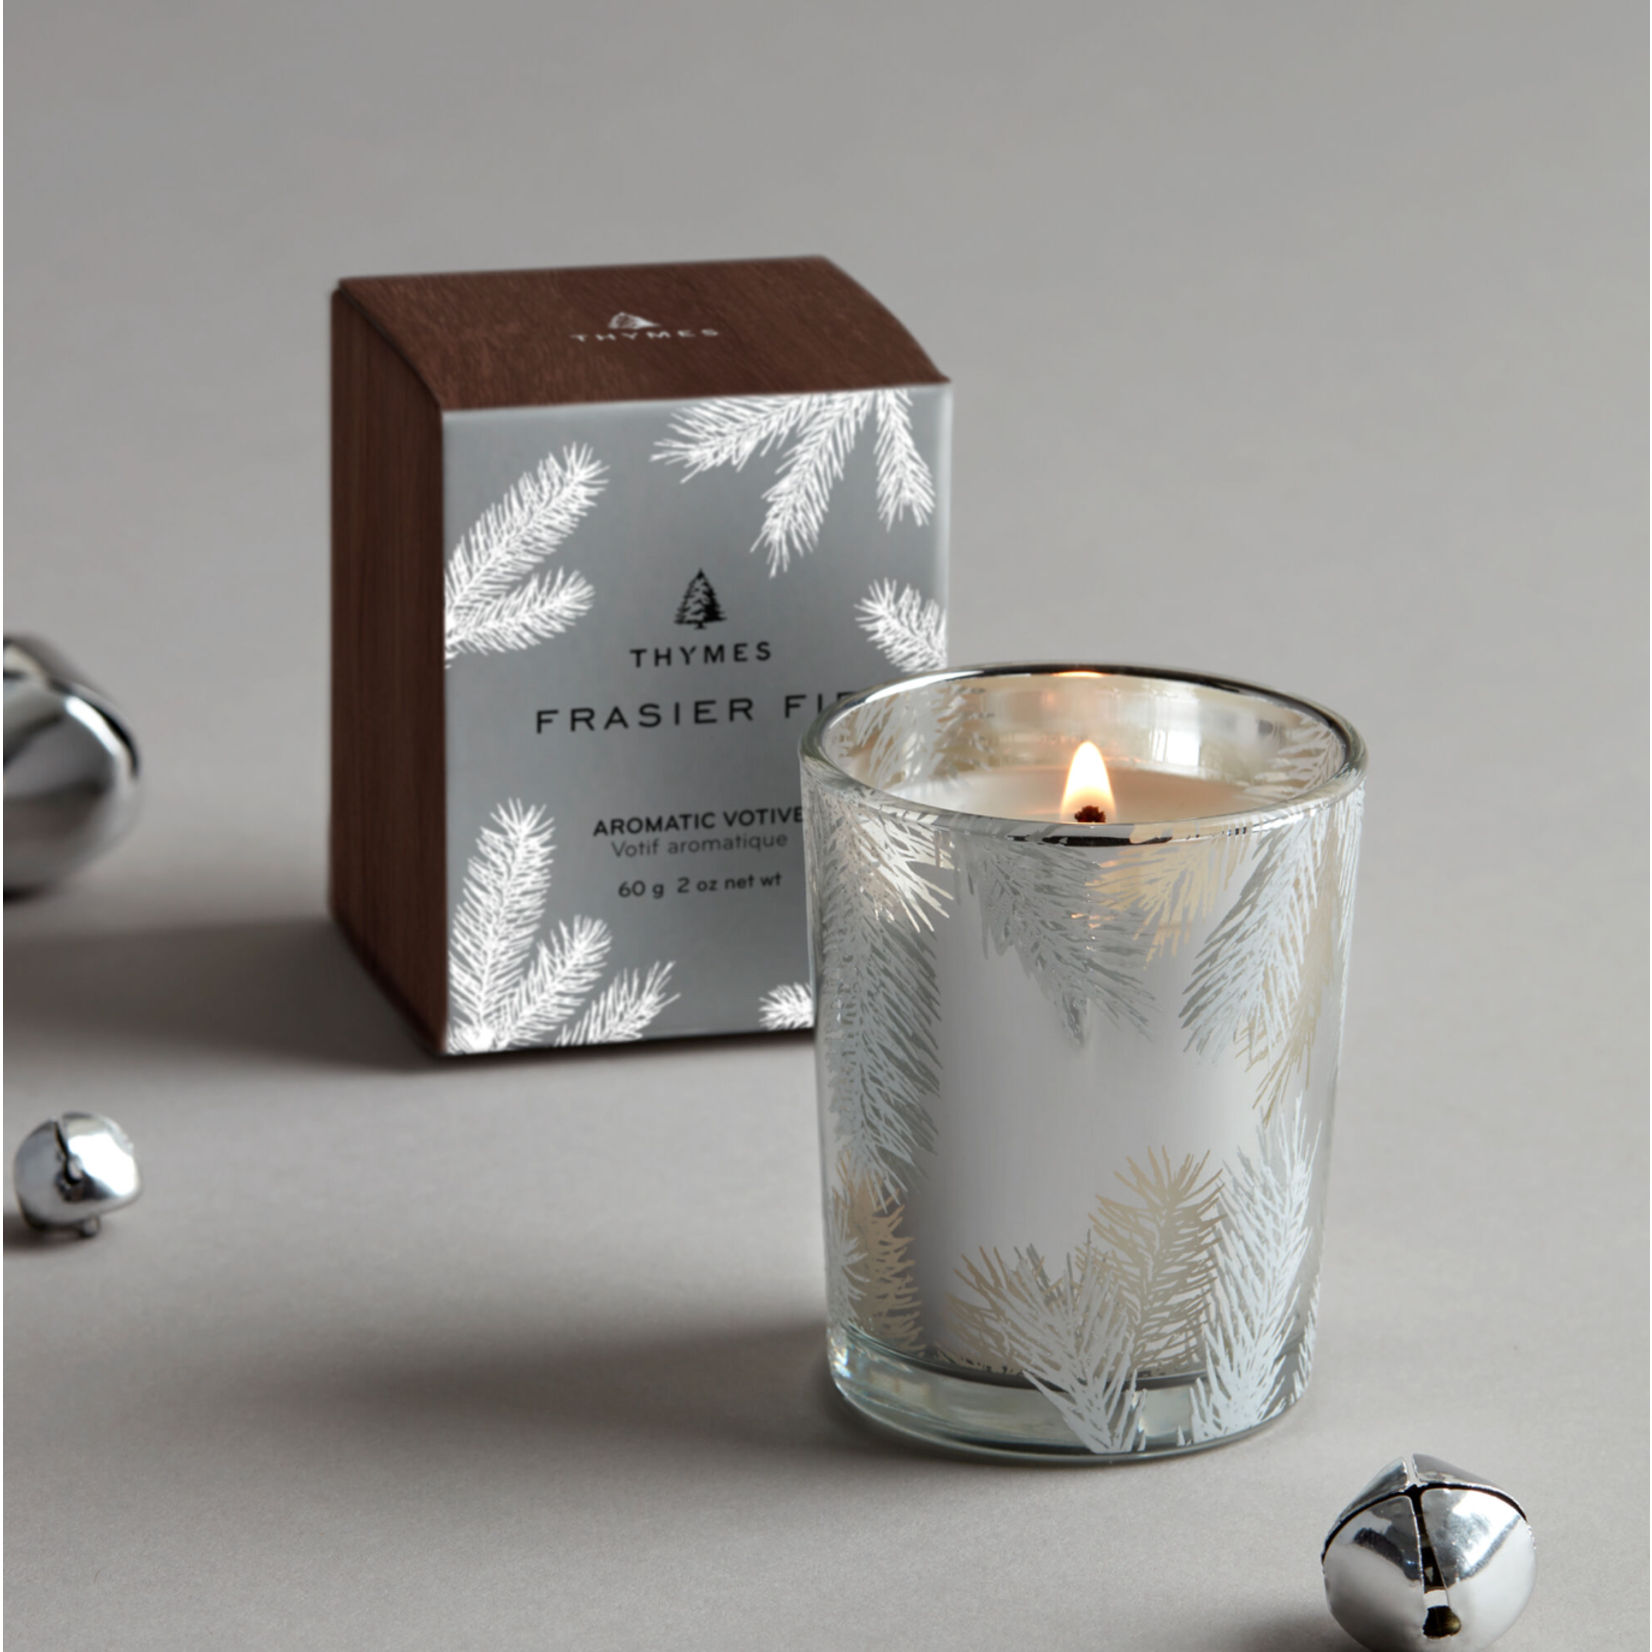 Thymes Frasier Fir Votive Candle - Silver